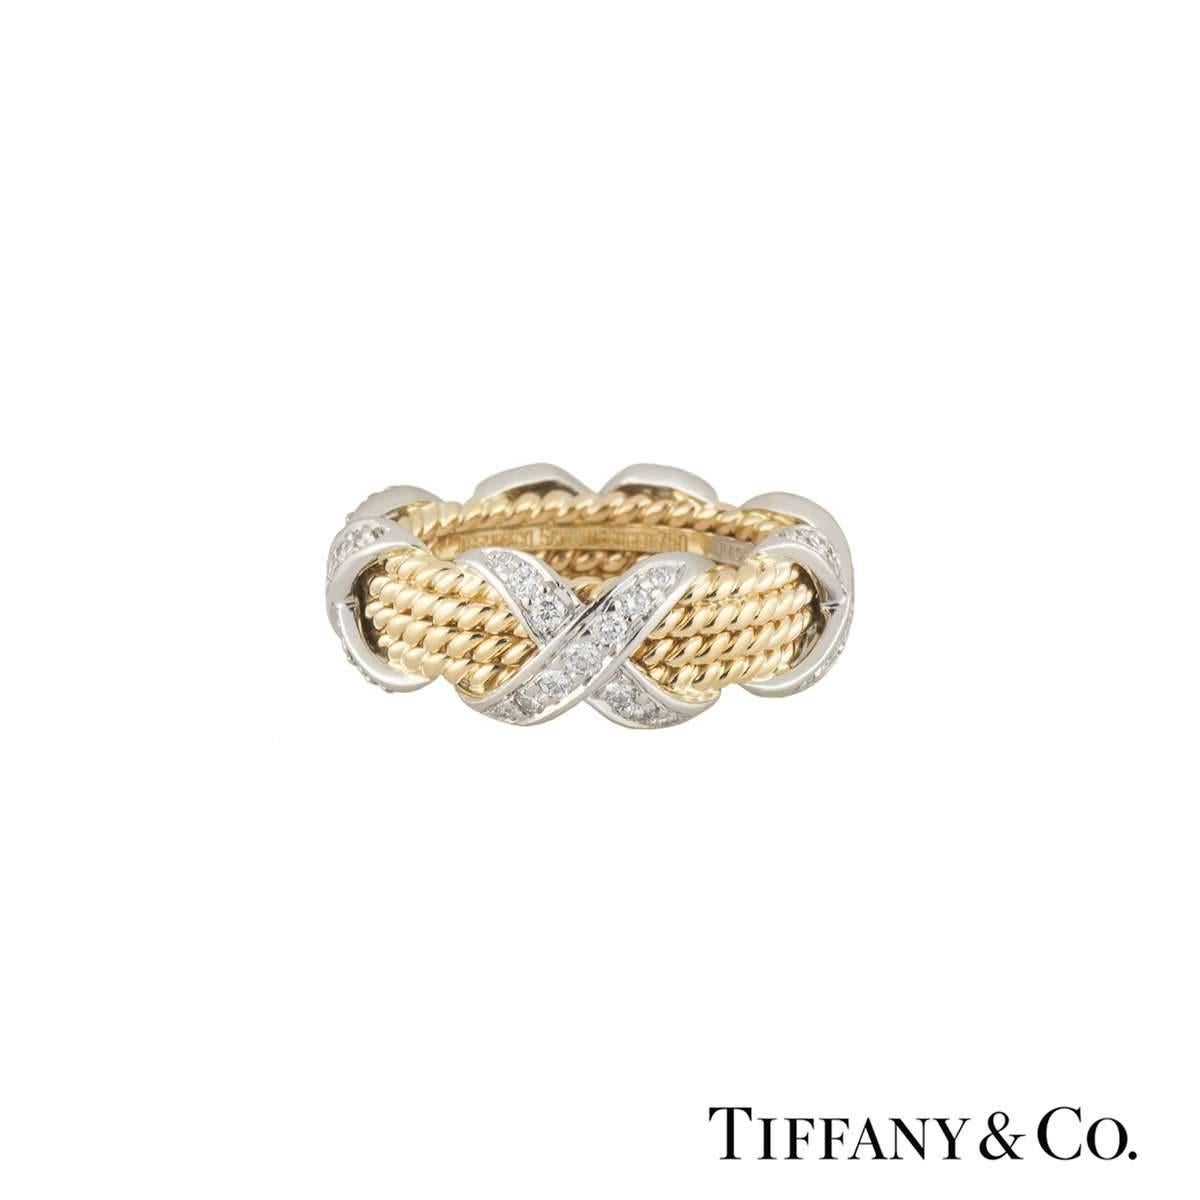 An 18k yellow gold and platinum Rope Four-Row Schlumberger ring by Tiffany & Co. The rope design ring features 4 signature 'X' motifs pave set with round brilliant cut diamonds totalling 0.54ct. The 8mm wide ring is a US size 6, EU size 52 and